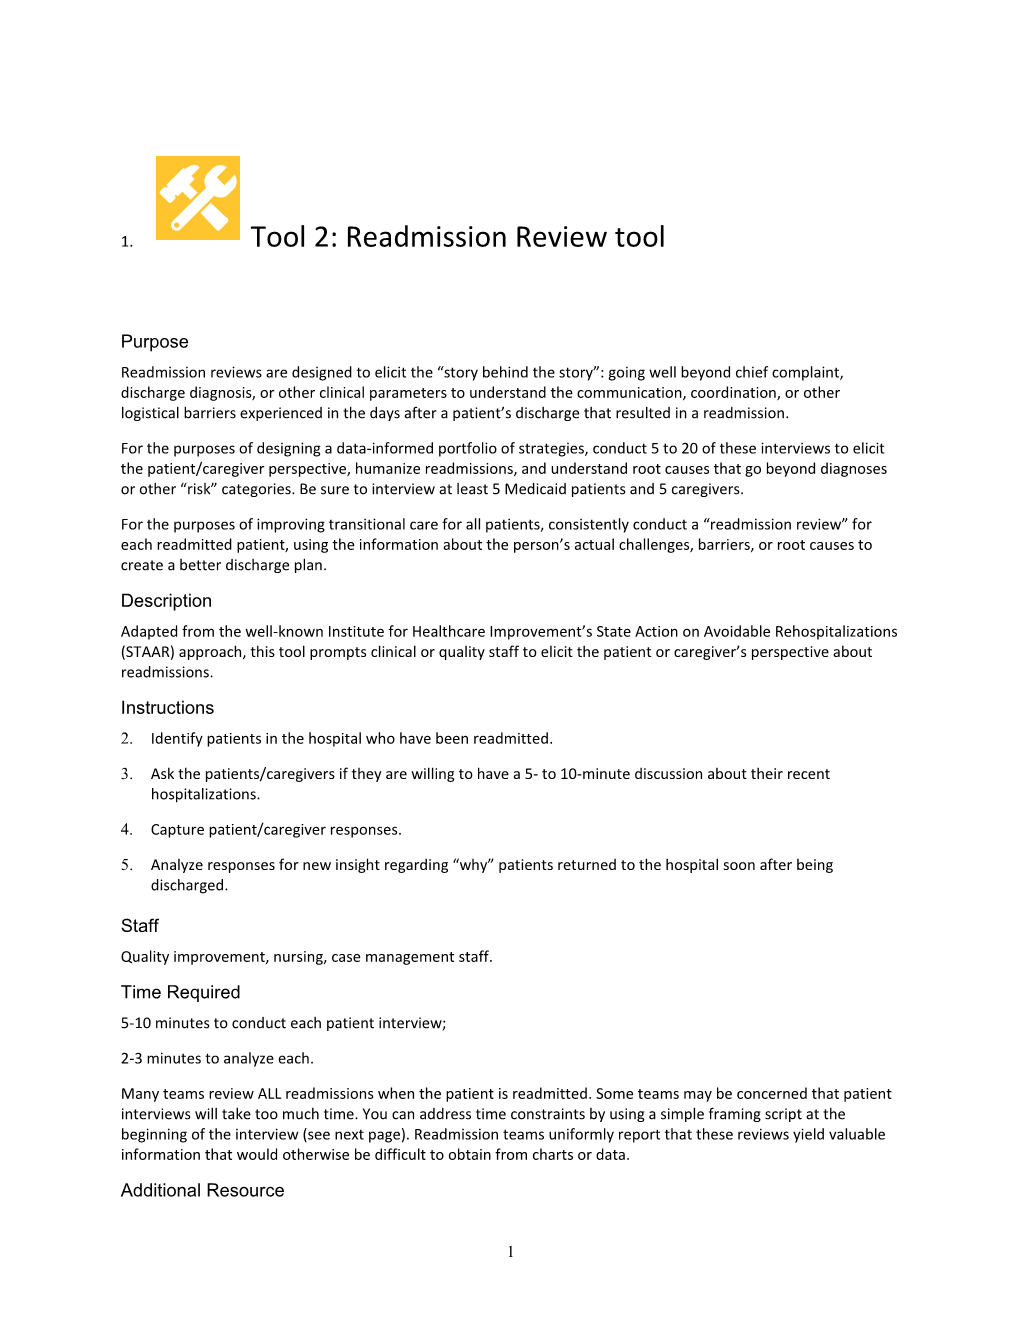 Tool 2: Readmission Review Tool